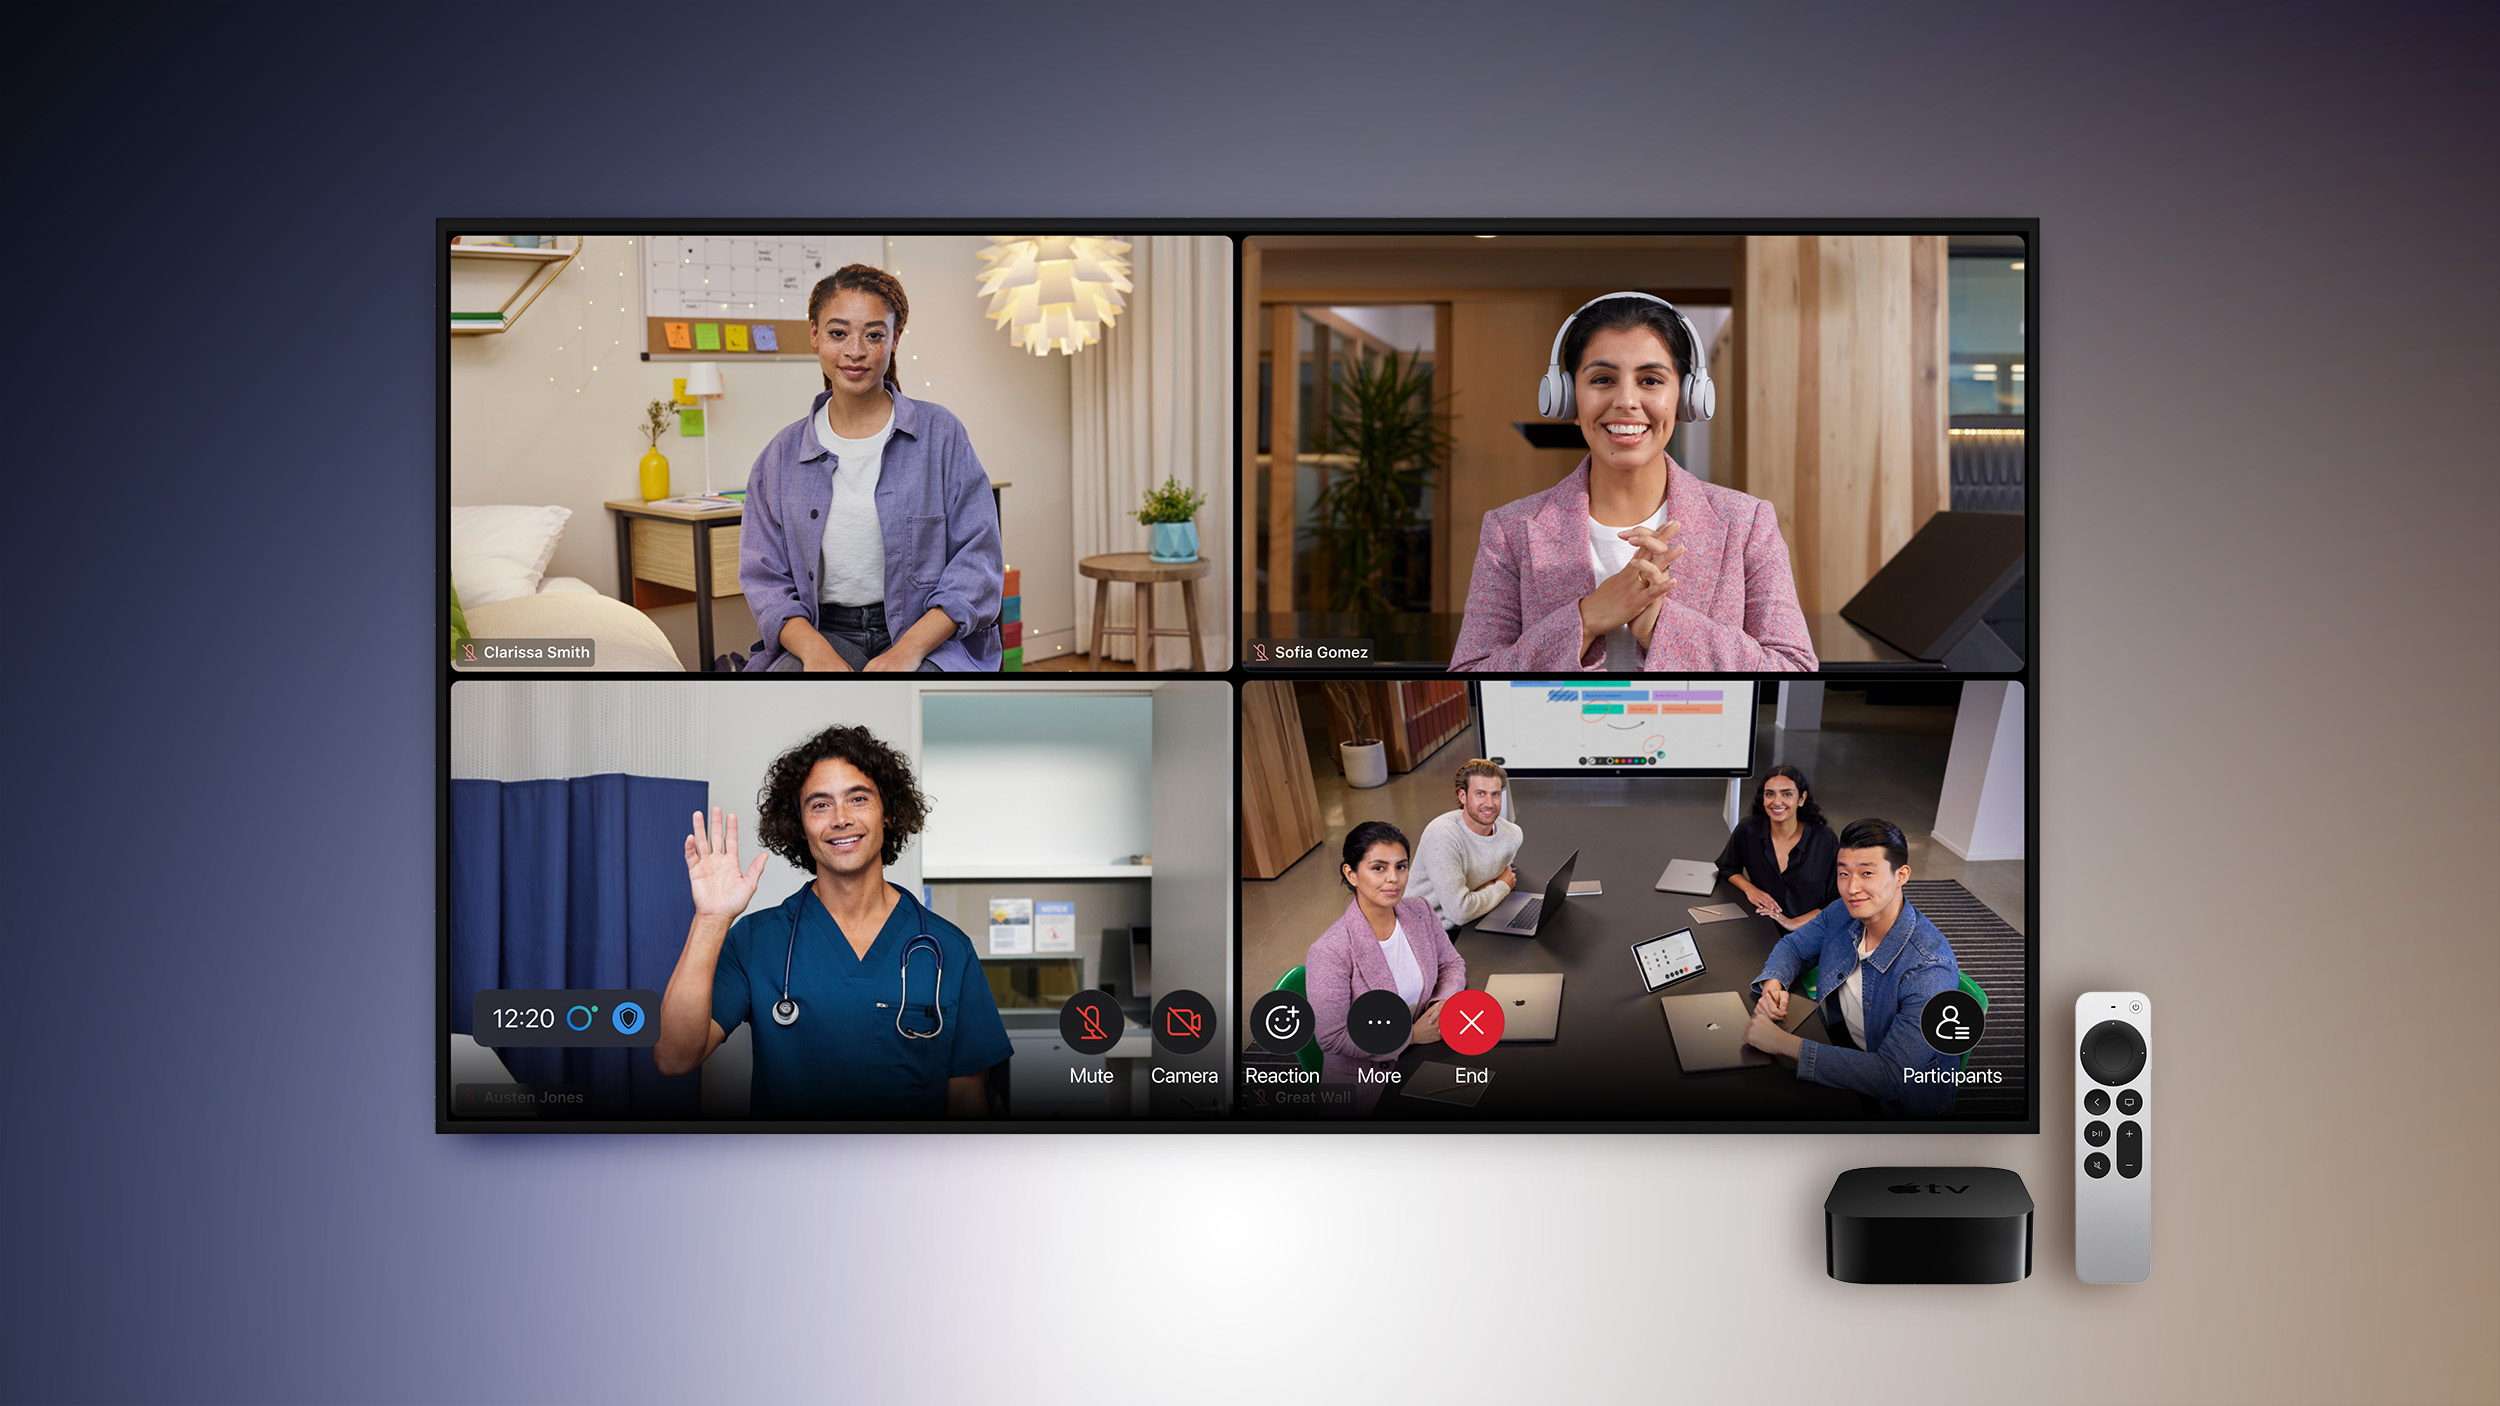 Webex App Will Soon Be Available on Apple TV for Video Conferencing